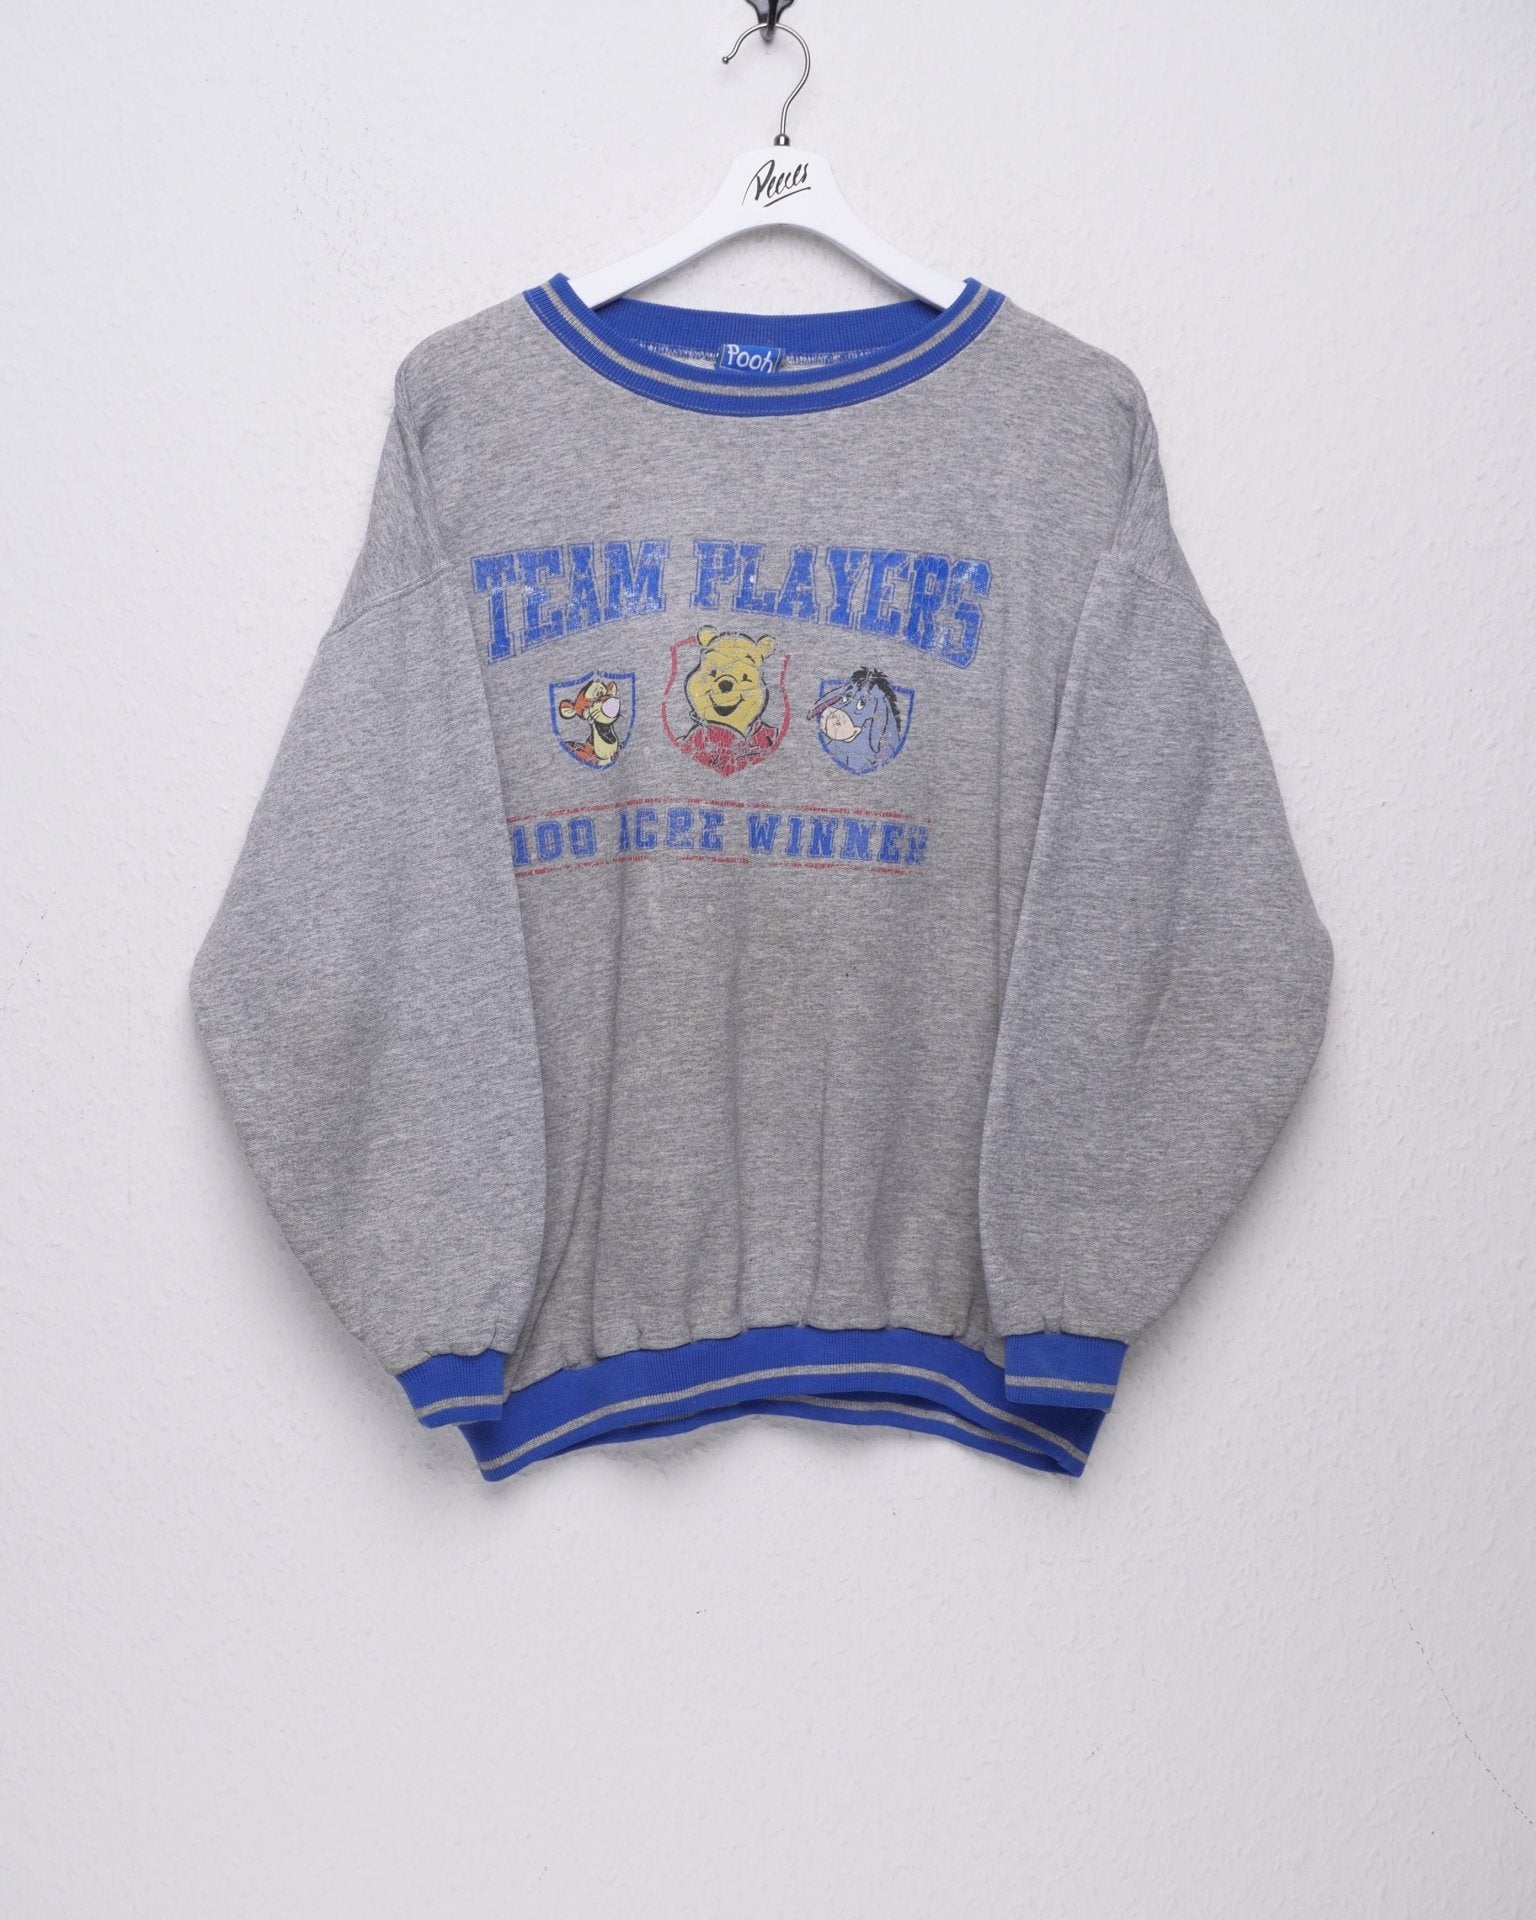 Pooh 'Team Players' printed Graphic grey Sweater - Peeces